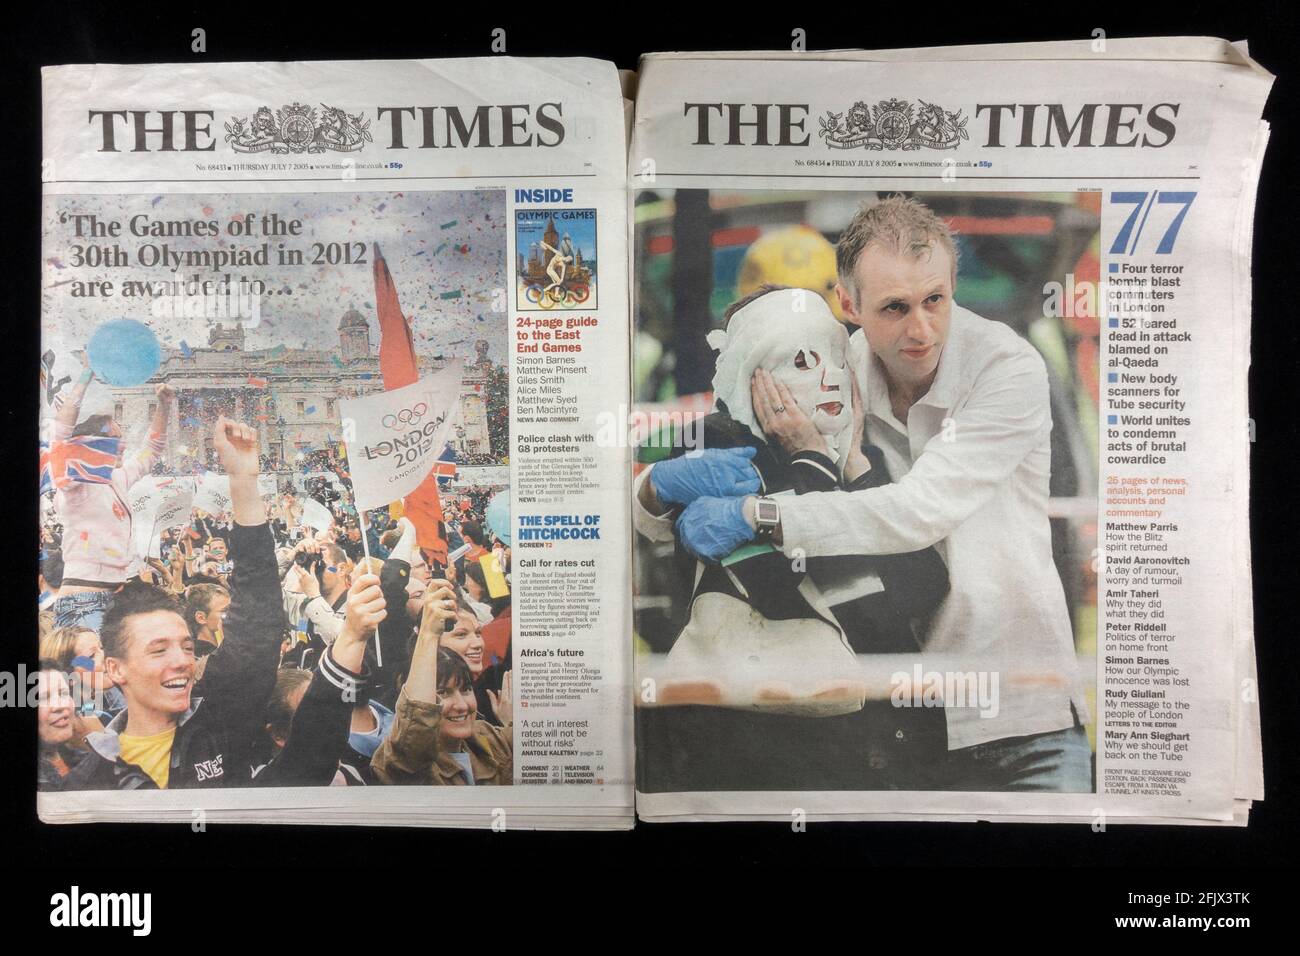 The front pages of The Times newspapers published on 7th (left) & 8th (right) July 2005 before and after the terrorists attacks. (SEE NOTES) Stock Photo